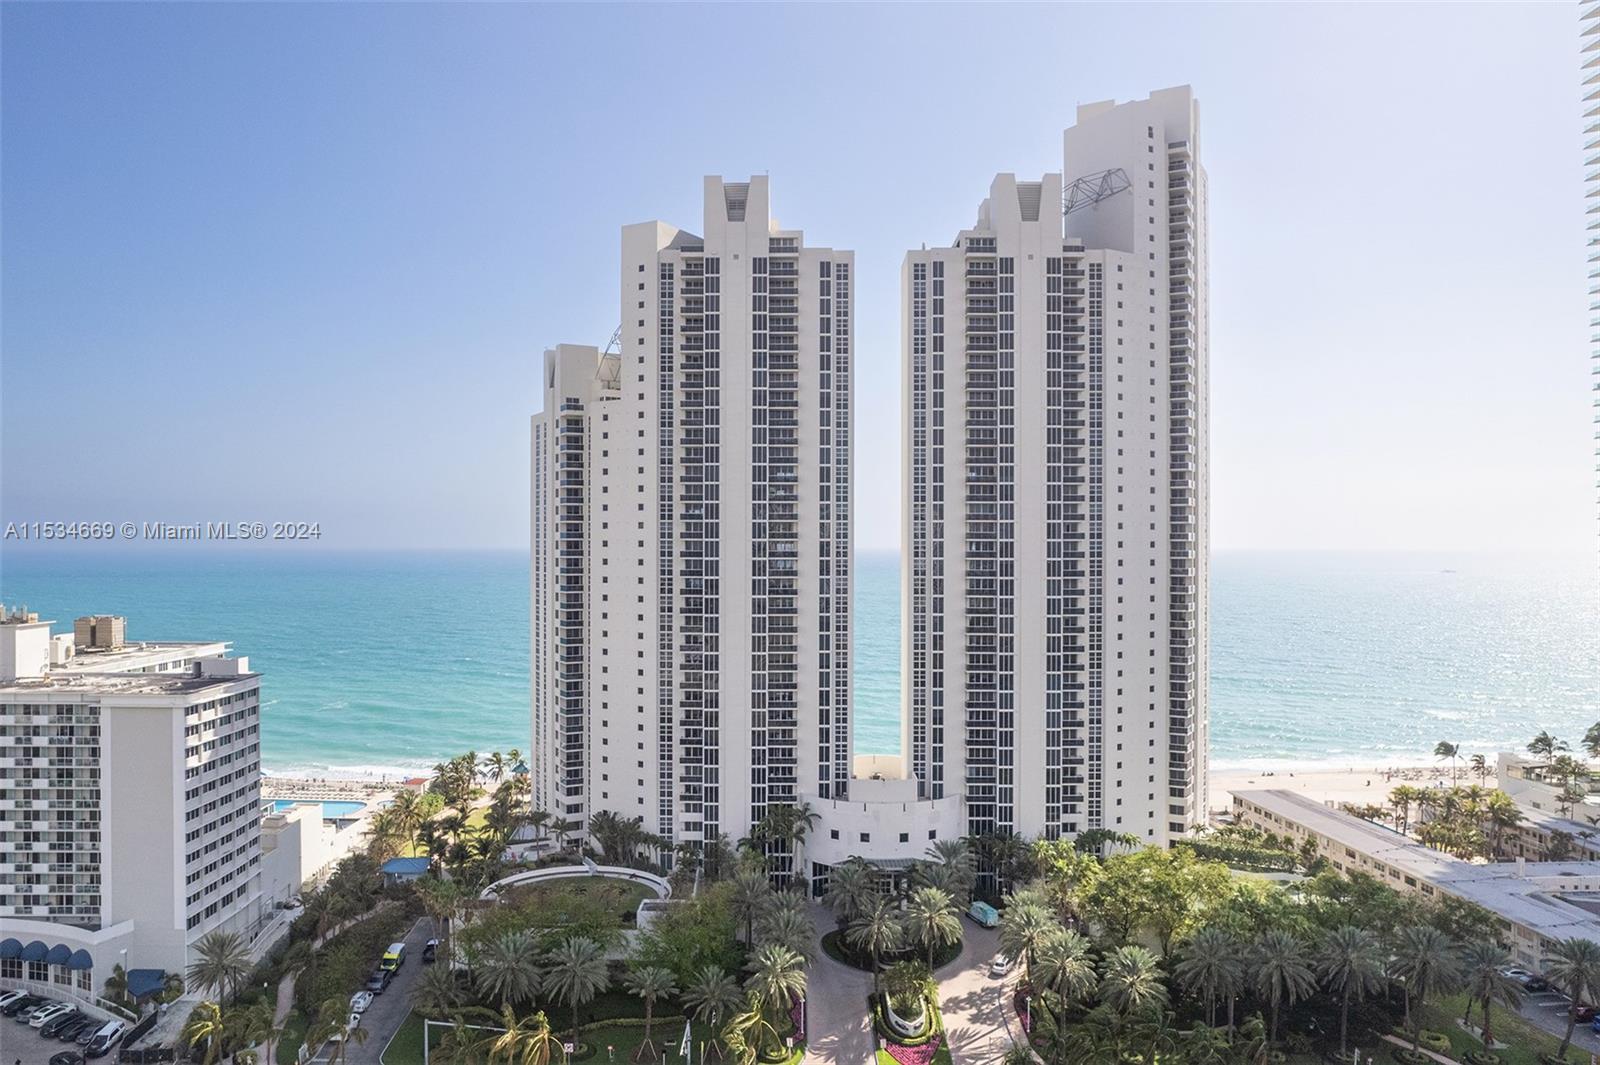 Photo of 19111 Collins Ave #908 in Sunny Isles Beach, FL